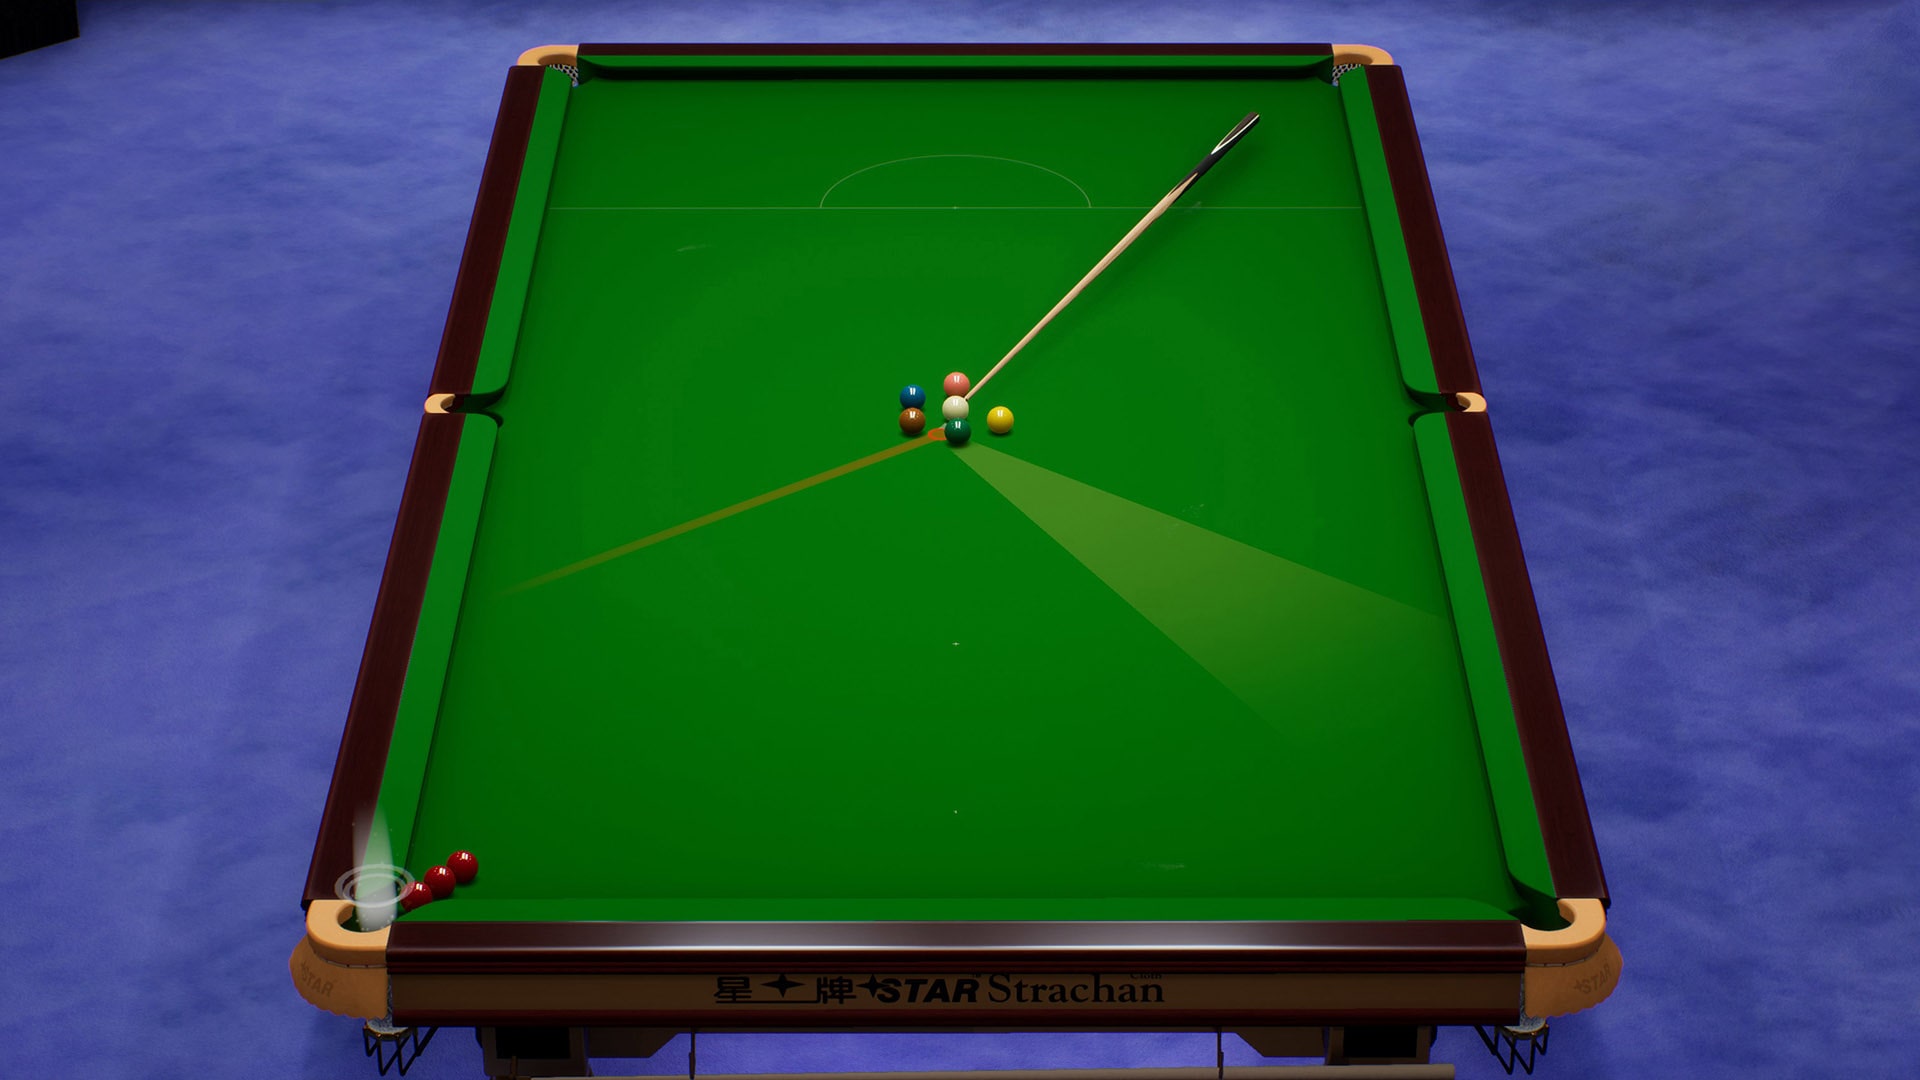 snooker 19 ps4 price